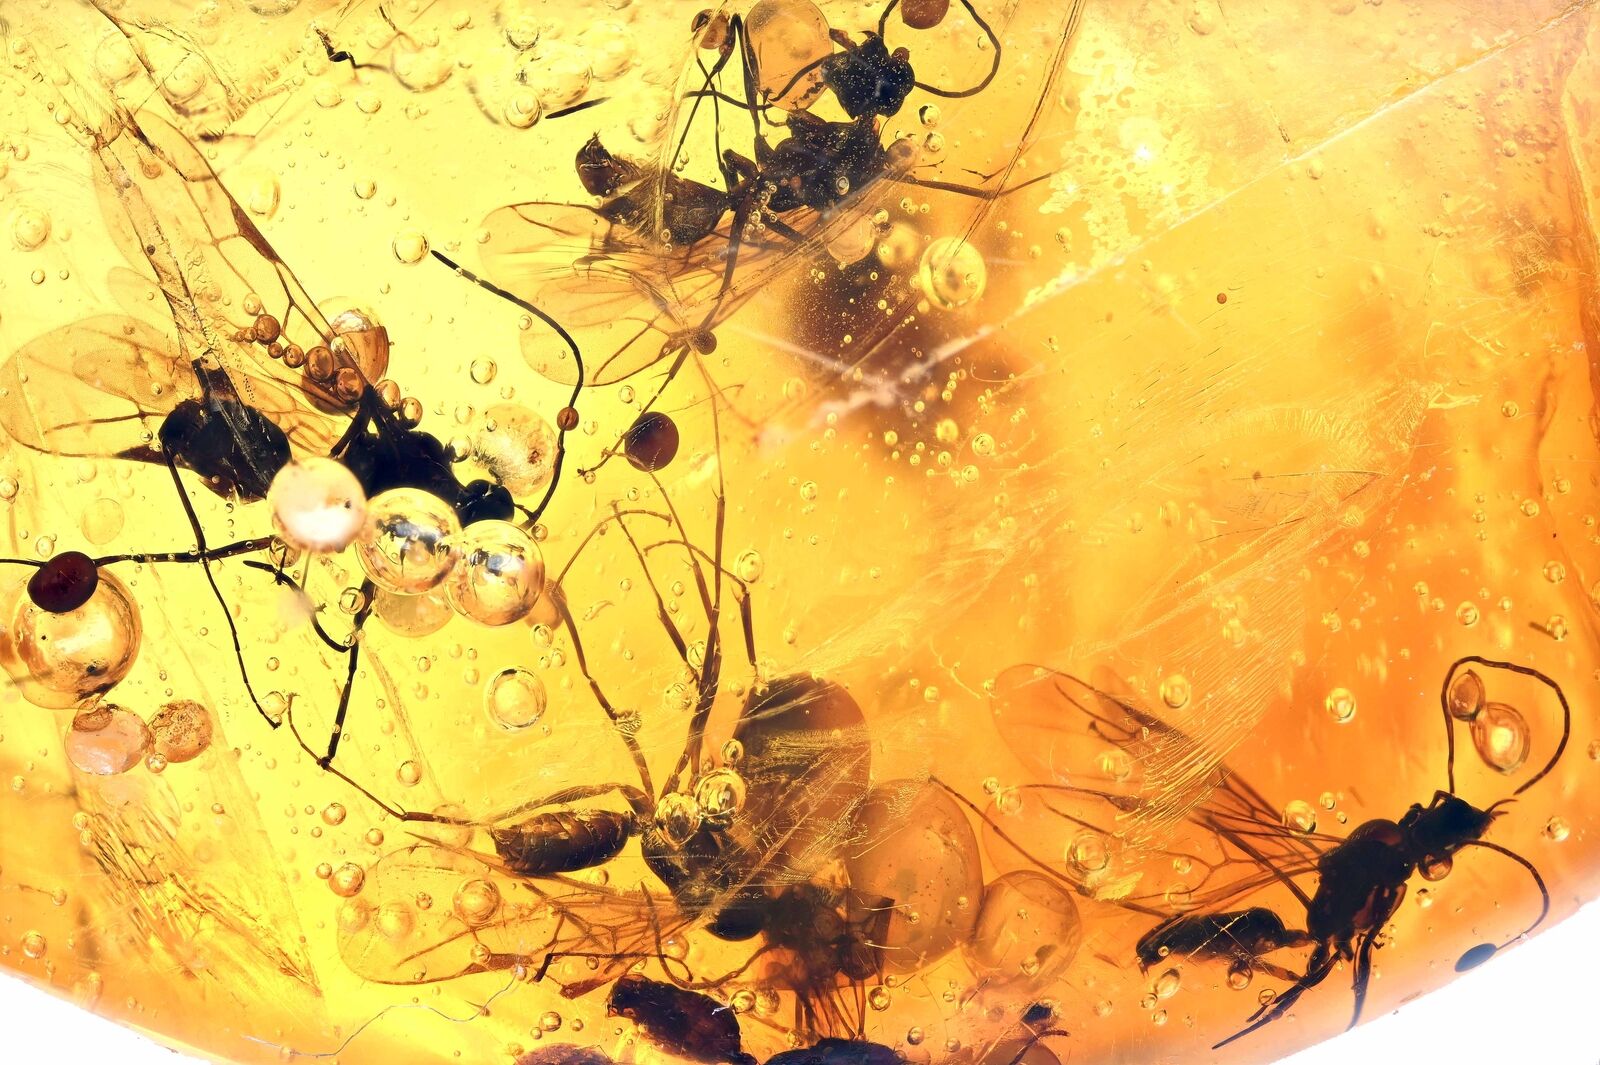 5x Winged Aculeata, Formicidae (Ant), Fossil Inclusion in Dominican Amber